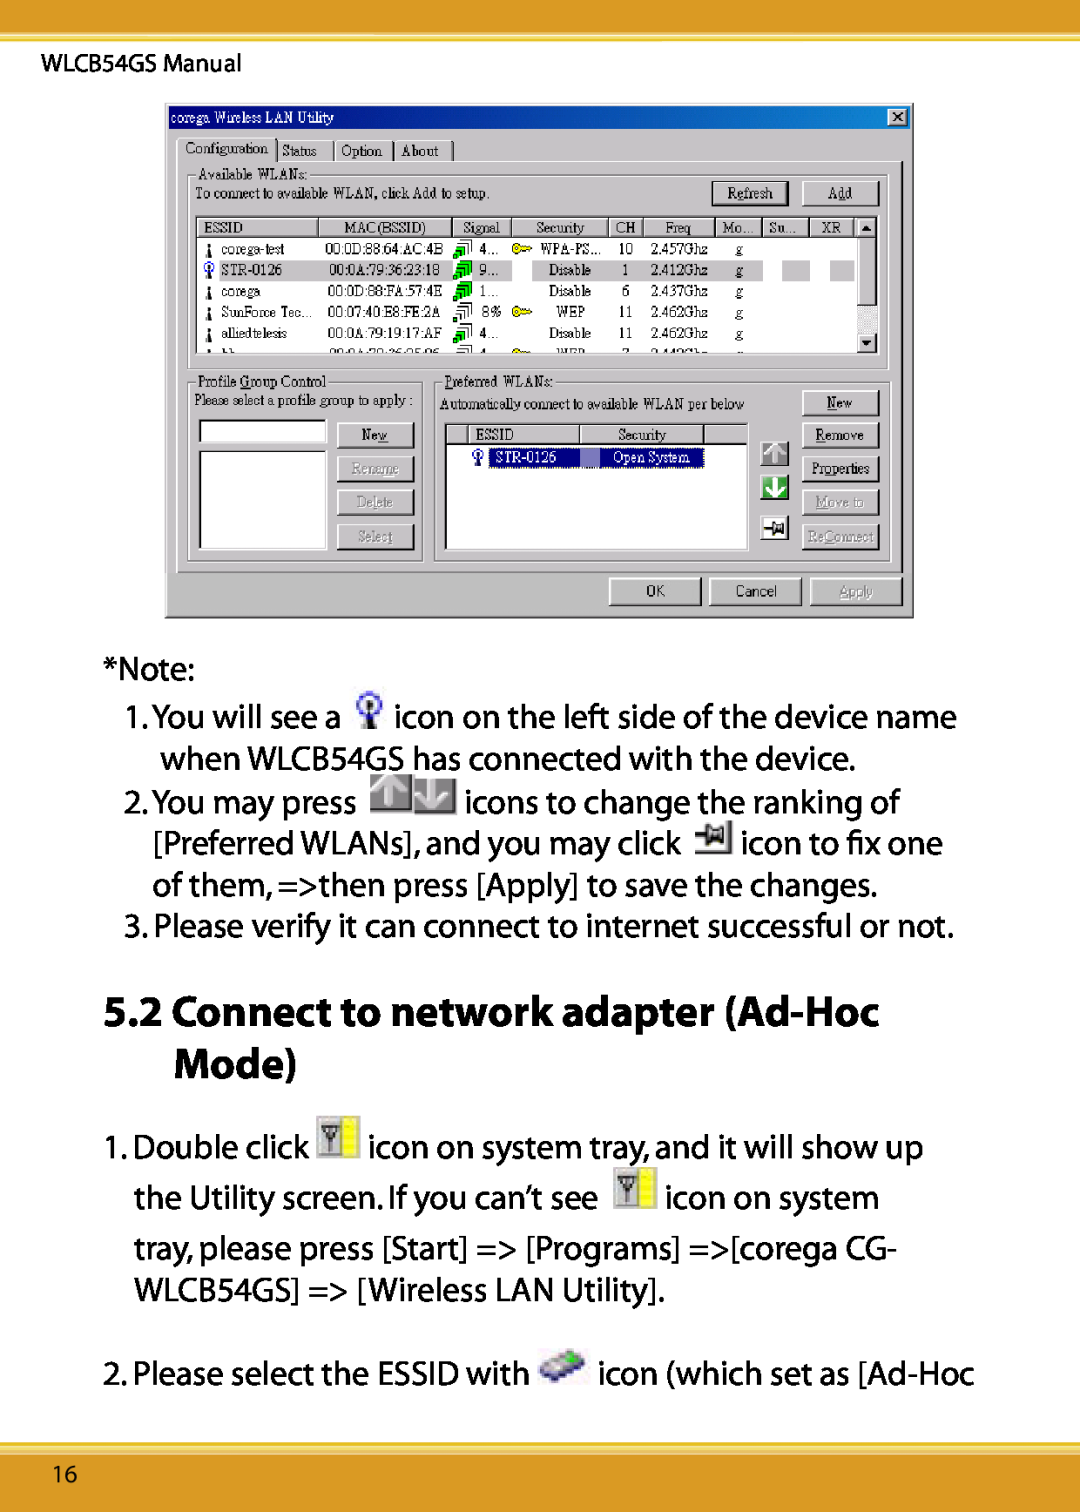 Corega 108M user manual Connect to network adapter Ad-Hoc Mode, Please verify it can connect to internet successful or not 